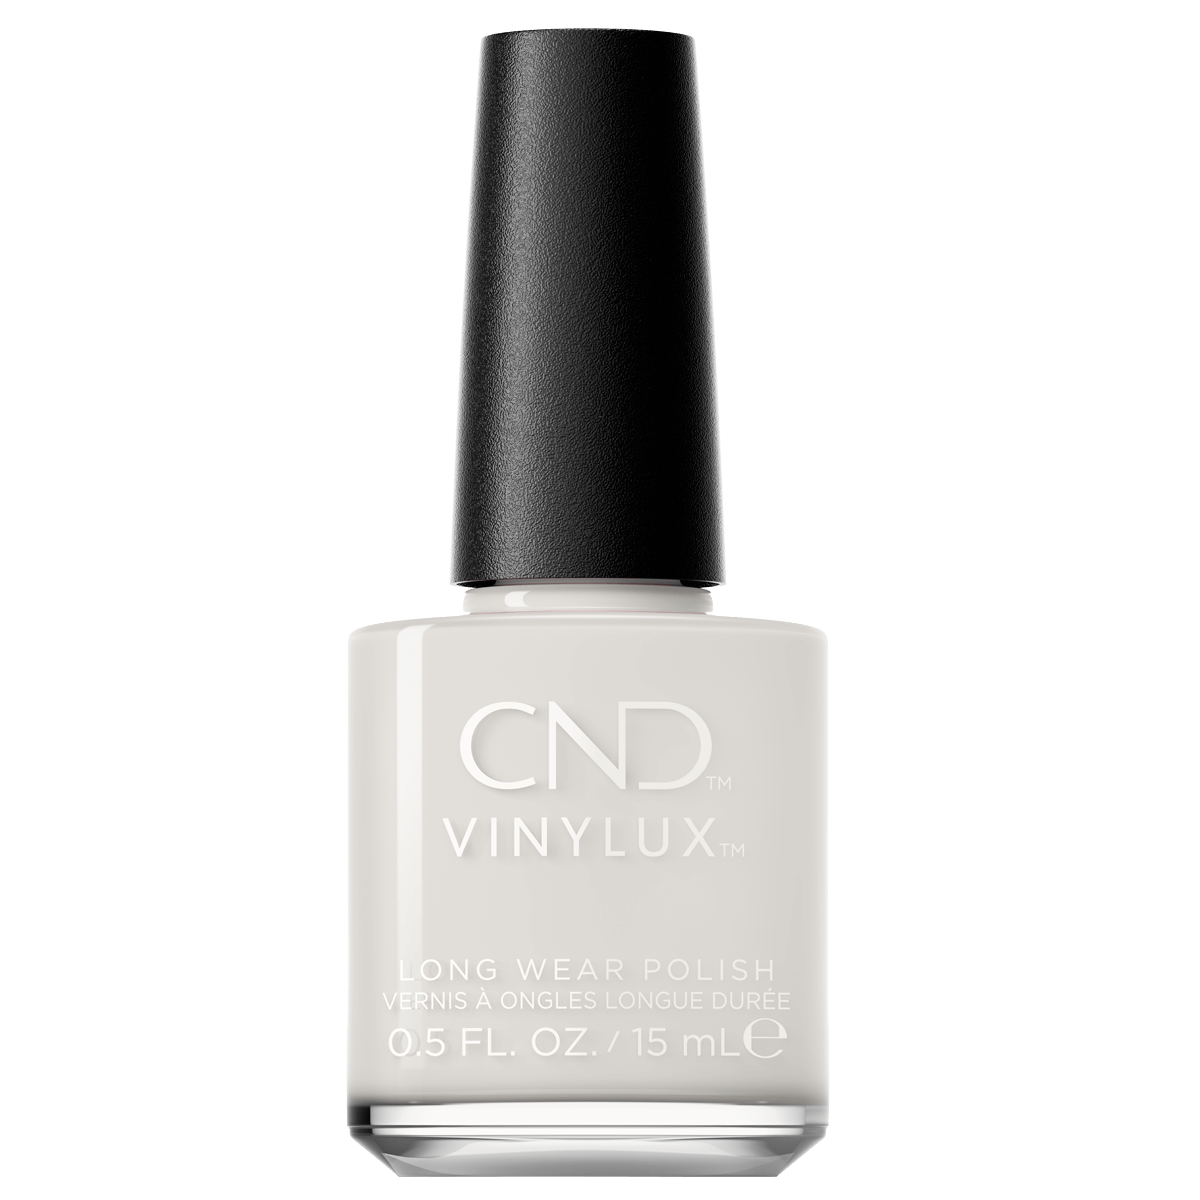 Vinylux CND Vernis à Ongles #434 All Frothed Up 15mL